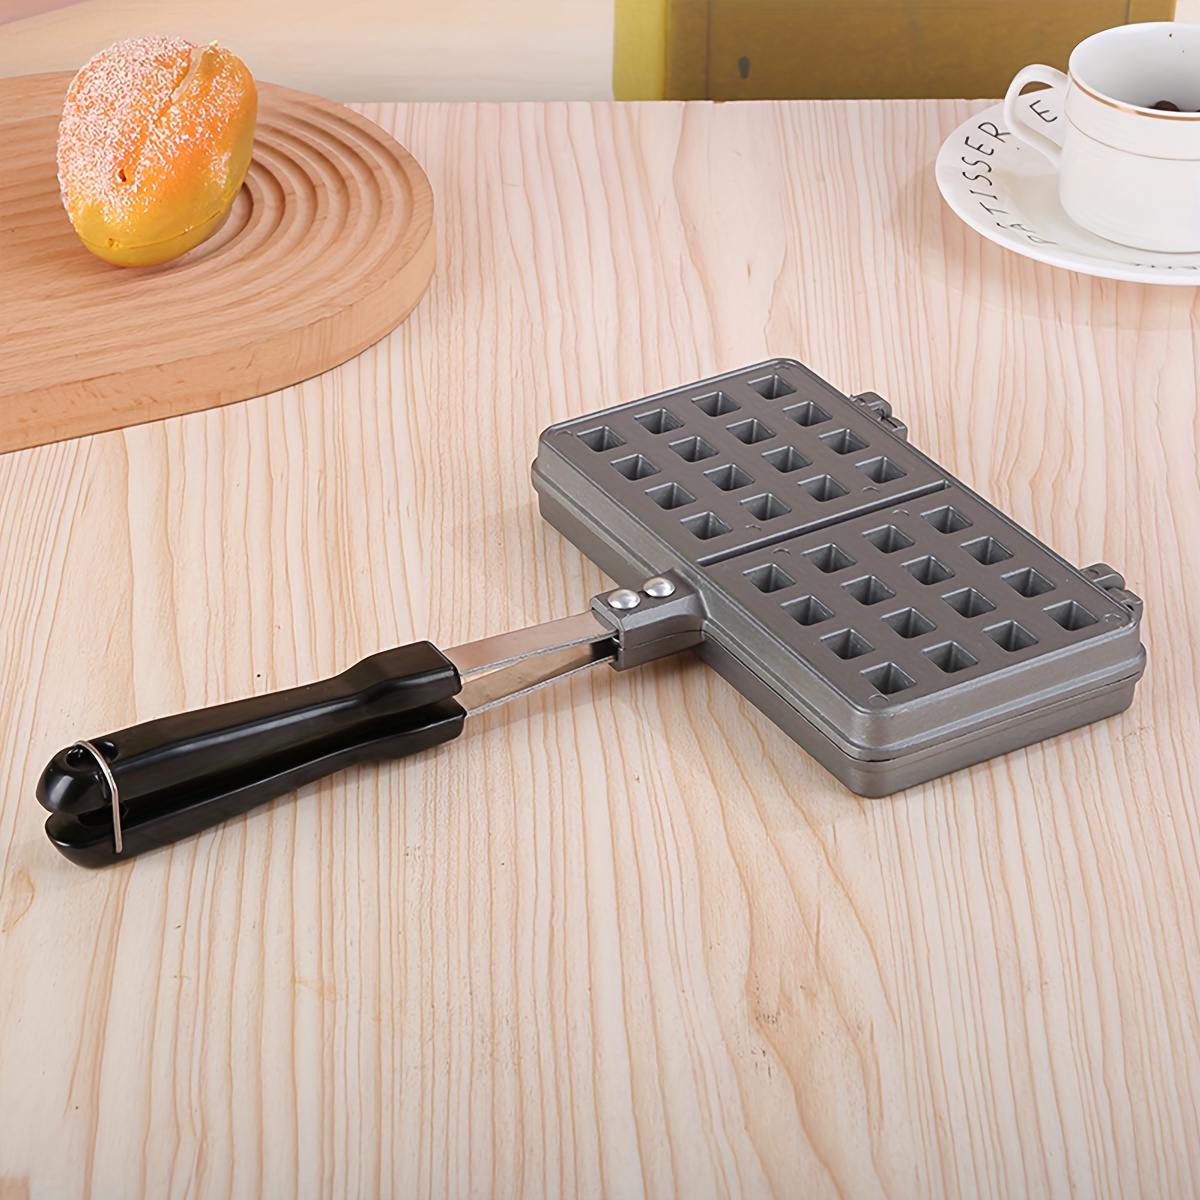 Non-stick Double-side Waffle Baking Mold Pan, Stove Top Waffle